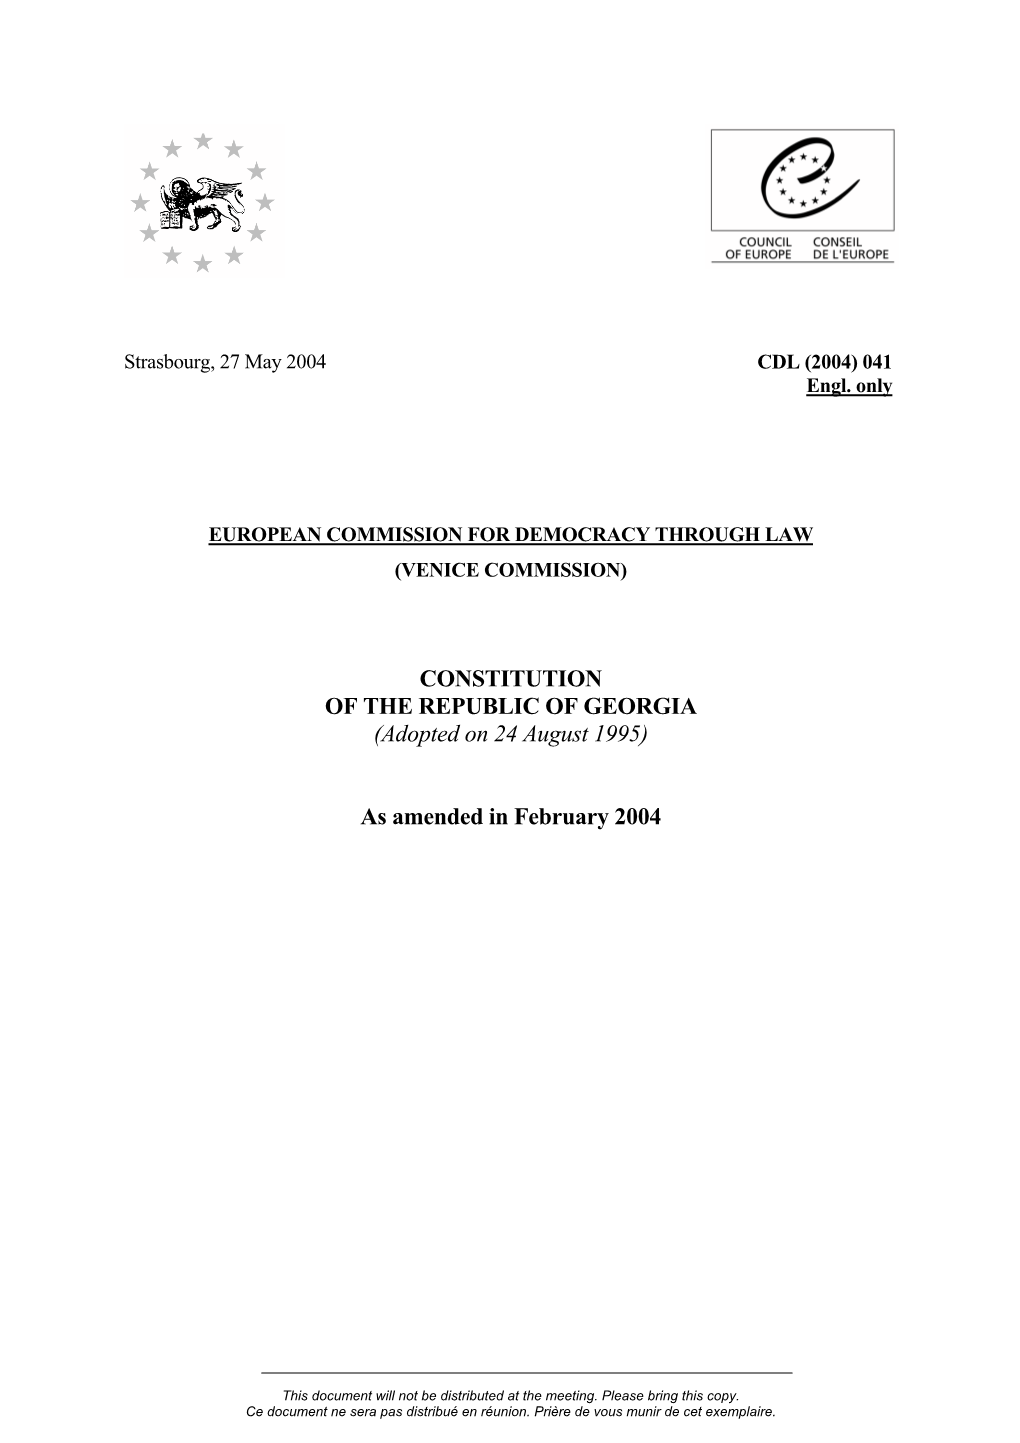 CONSTITUTION of the REPUBLIC of GEORGIA (Adopted on 24 August 1995)